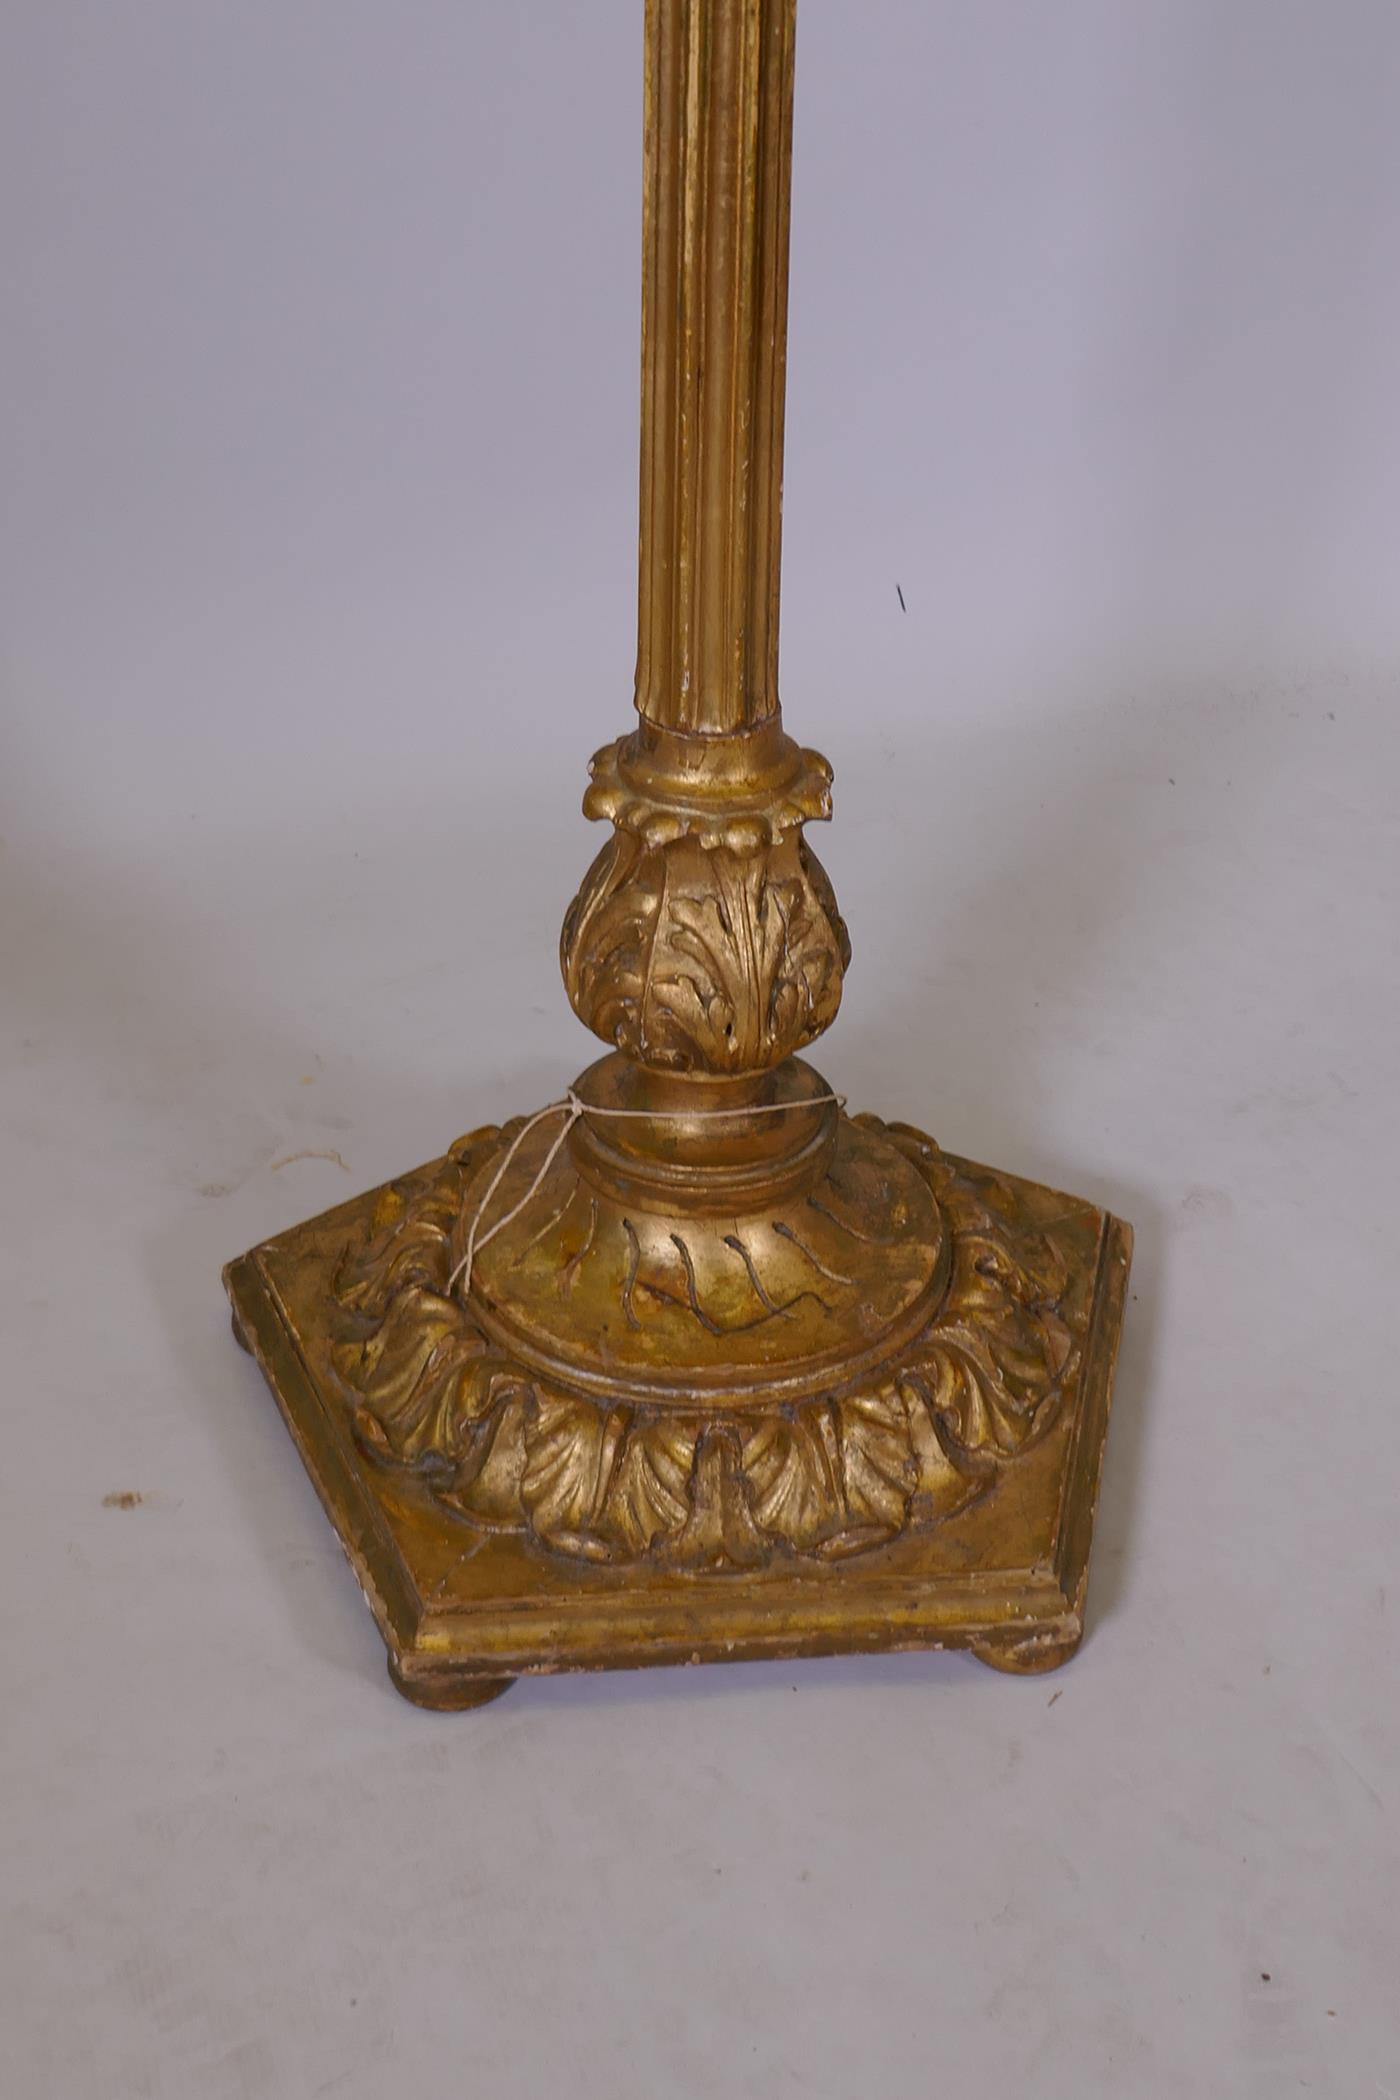 Italian giltwood floor lamp in the form of a lantern, mid C20th, 77" high - Image 2 of 5